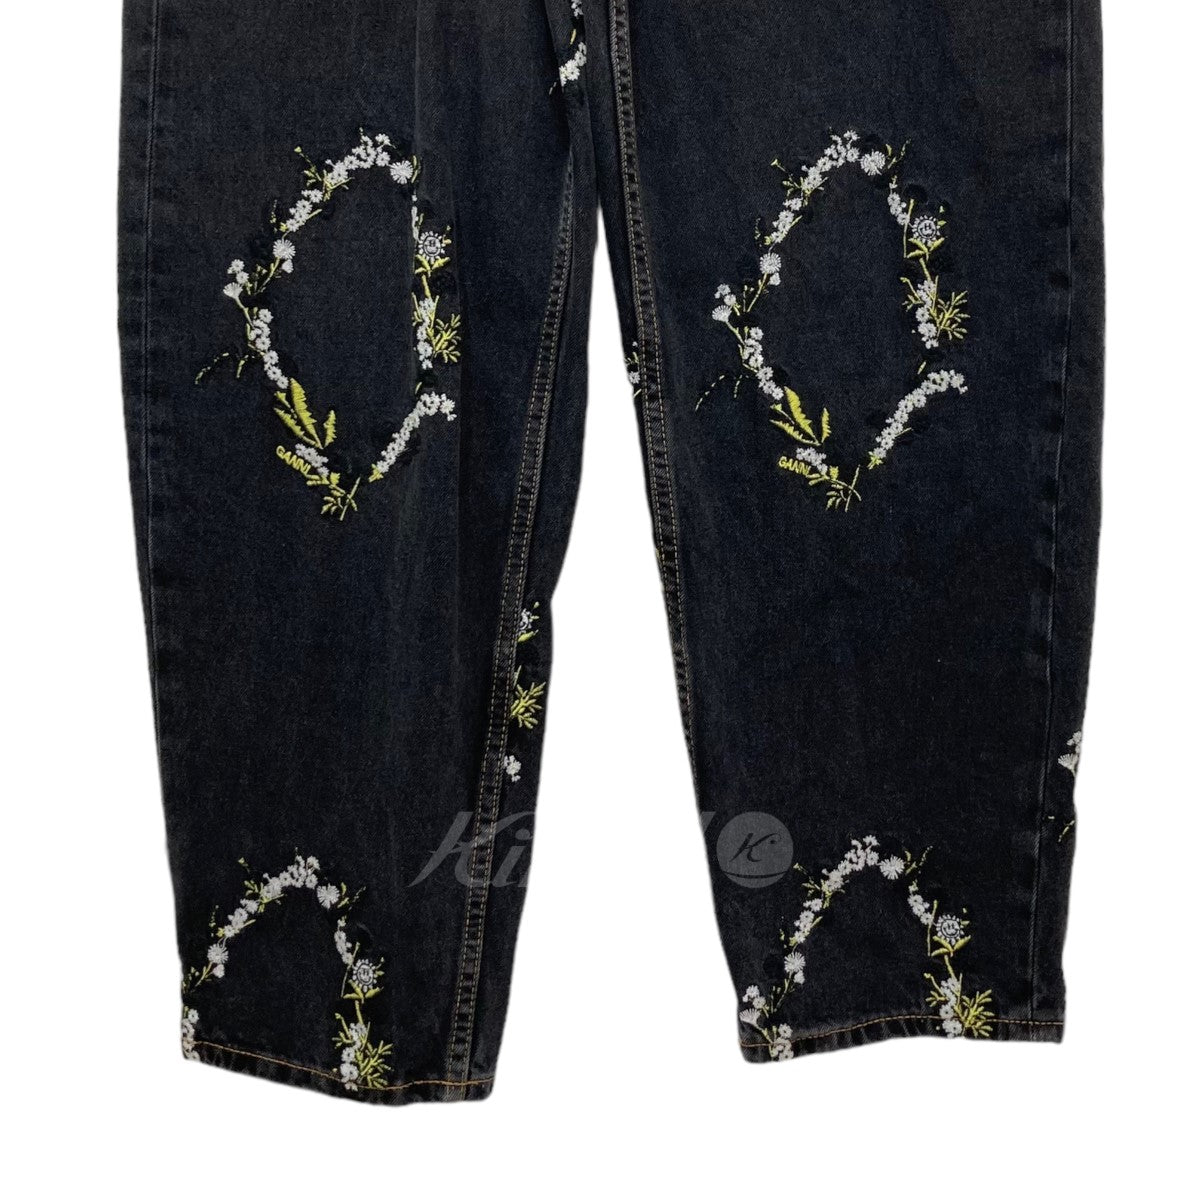 Stary Jeans Embroidery 花柄刺繍デニムパンツ